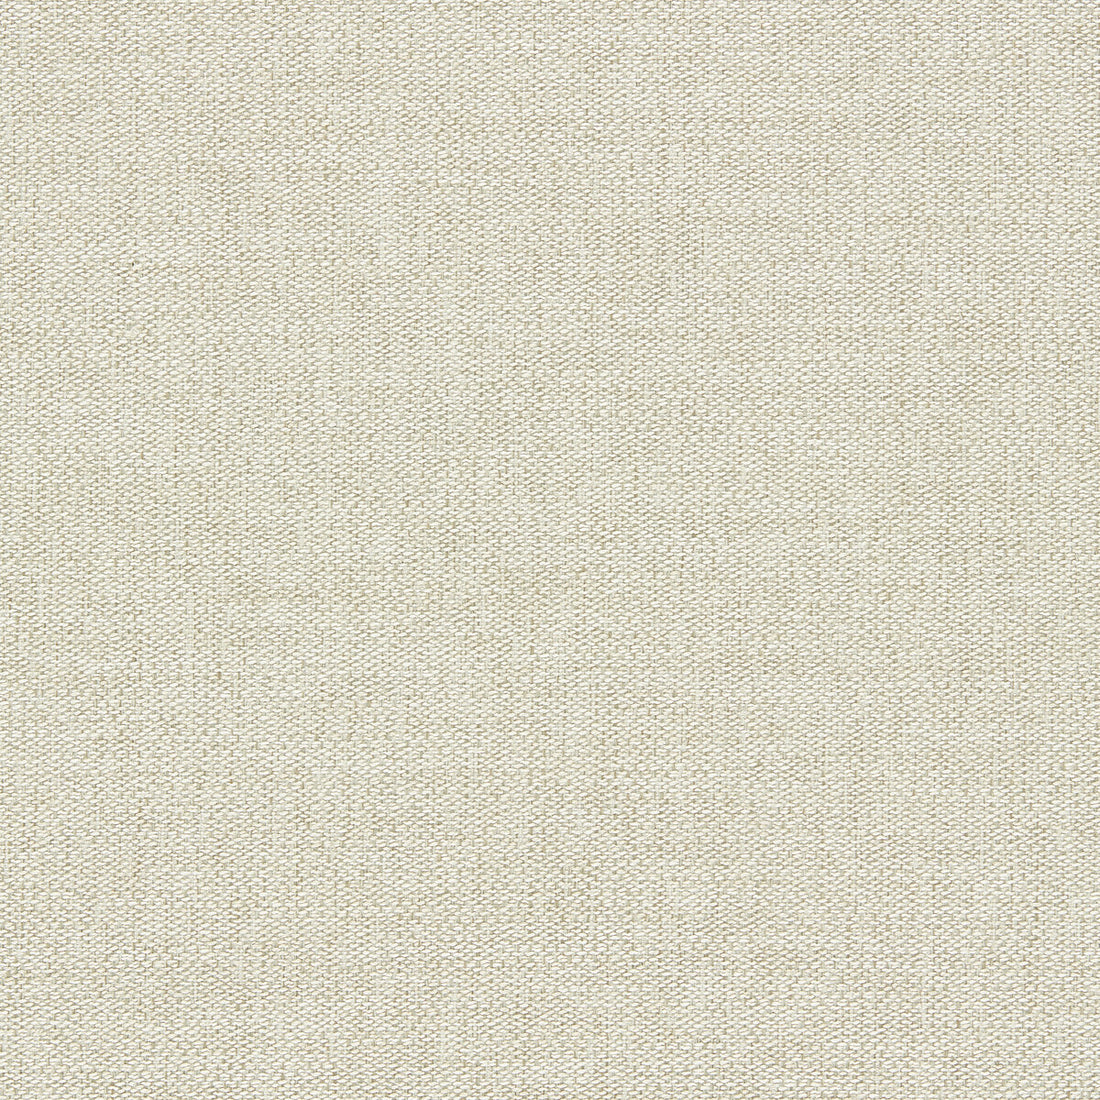 Llanara fabric in linen color - pattern F1422/05.CAC.0 - by Clarke And Clarke in the Clarke &amp; Clarke Purus collection